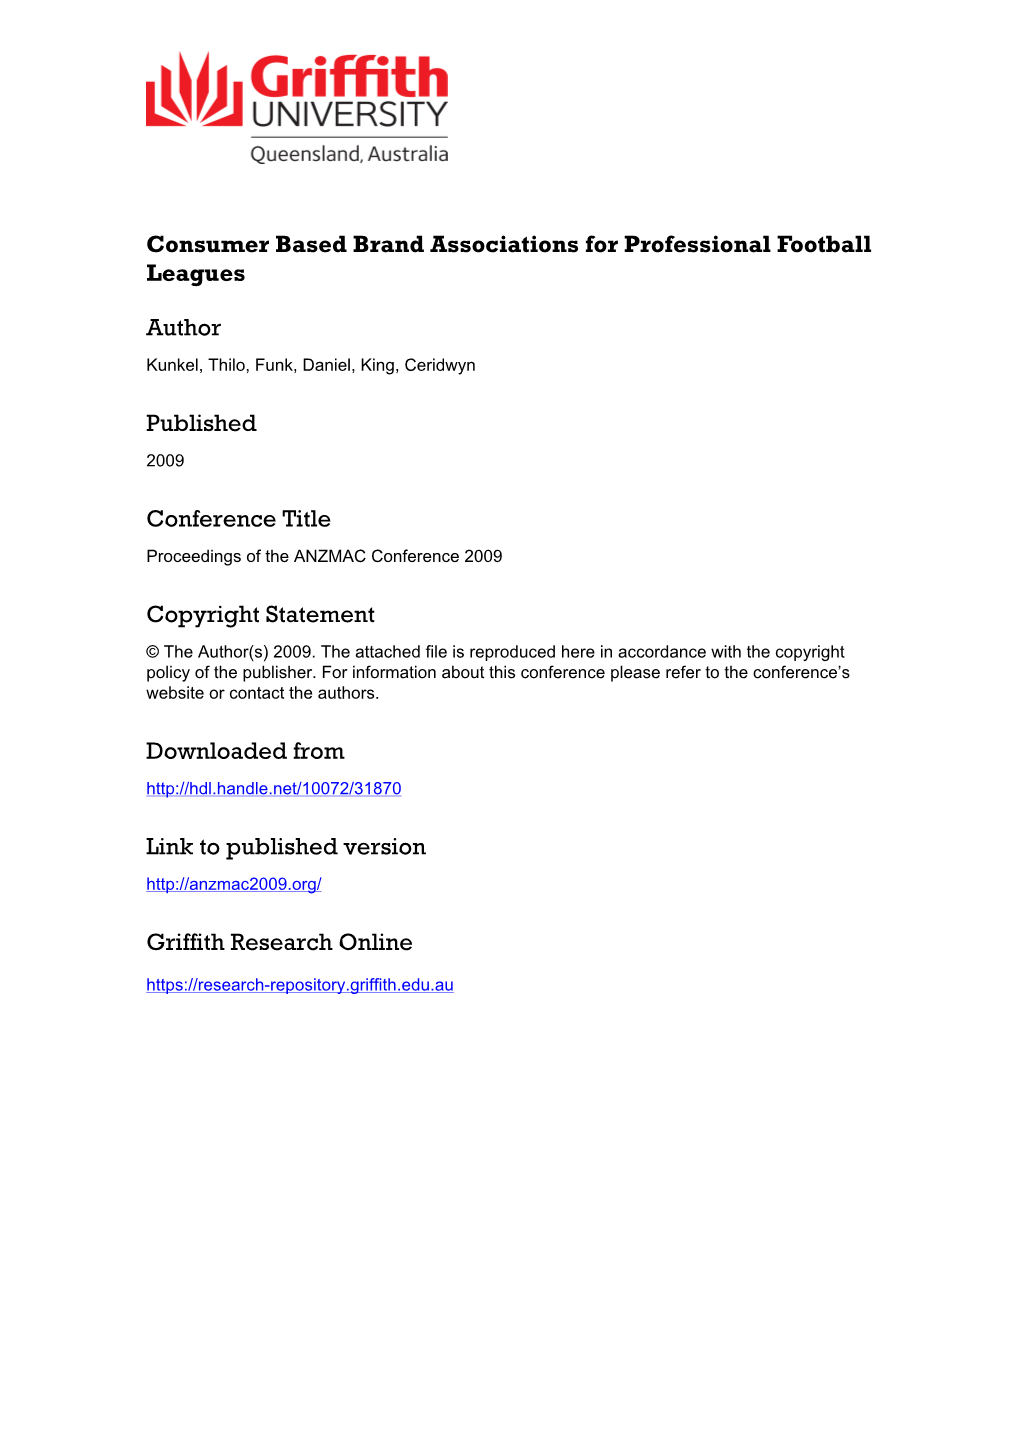 Consumer Based Brand Associations for Professional Football Leagues